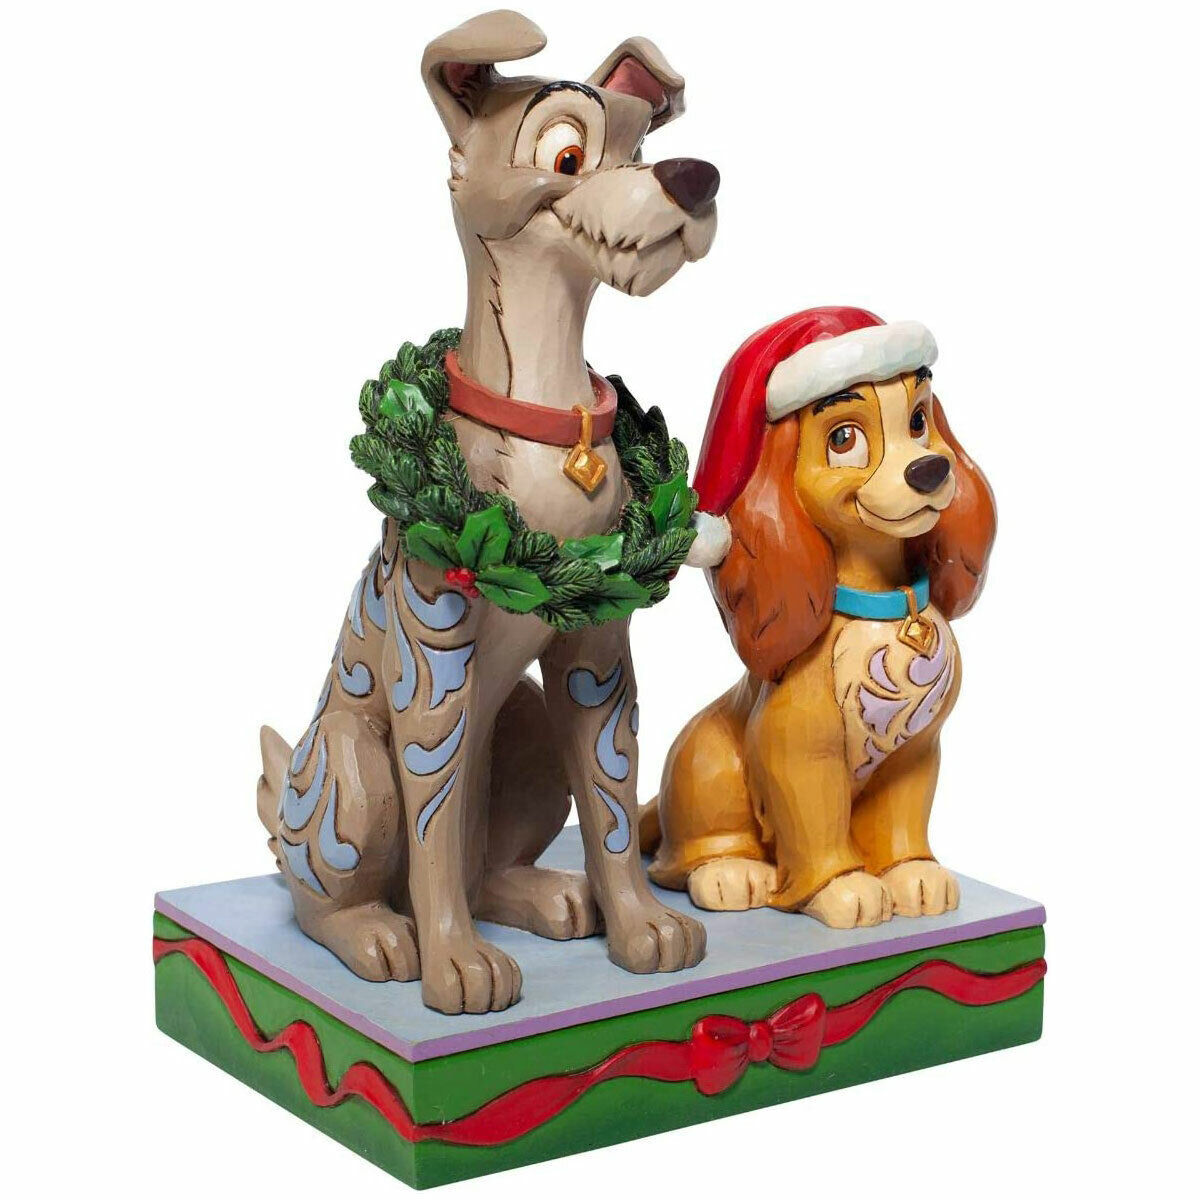 New Disney Traditions Figurine - Lady and the Tramp Decked Out Dogs